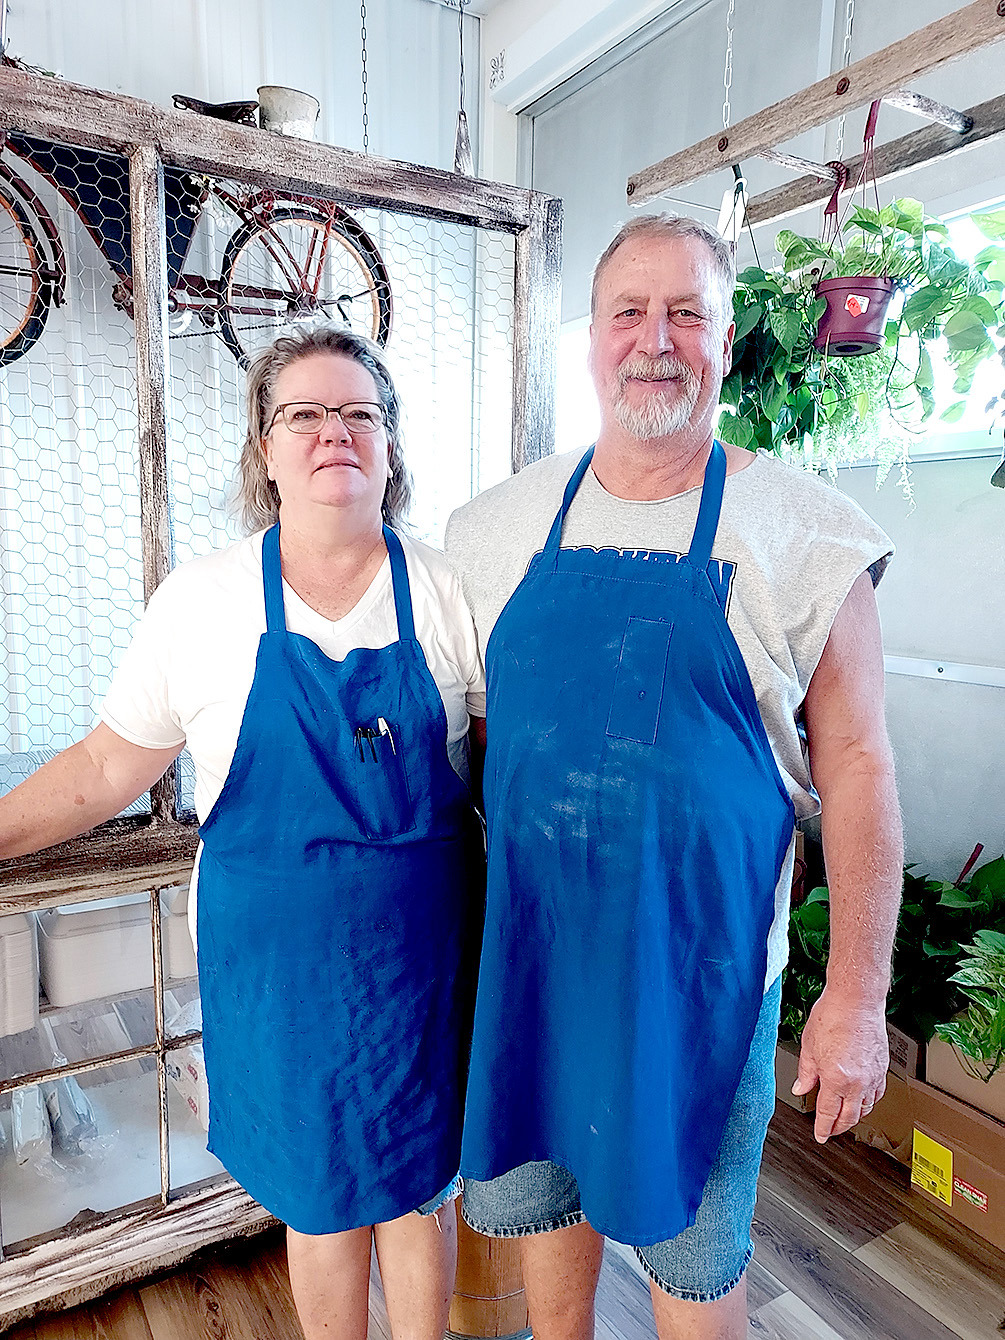 CHERYL AND RUSTY HRABE are the owners of Webster’s Supermarket and Shirley May’s Deli, and invite everyone to come in and see the Deli’s location and what they have to offer.